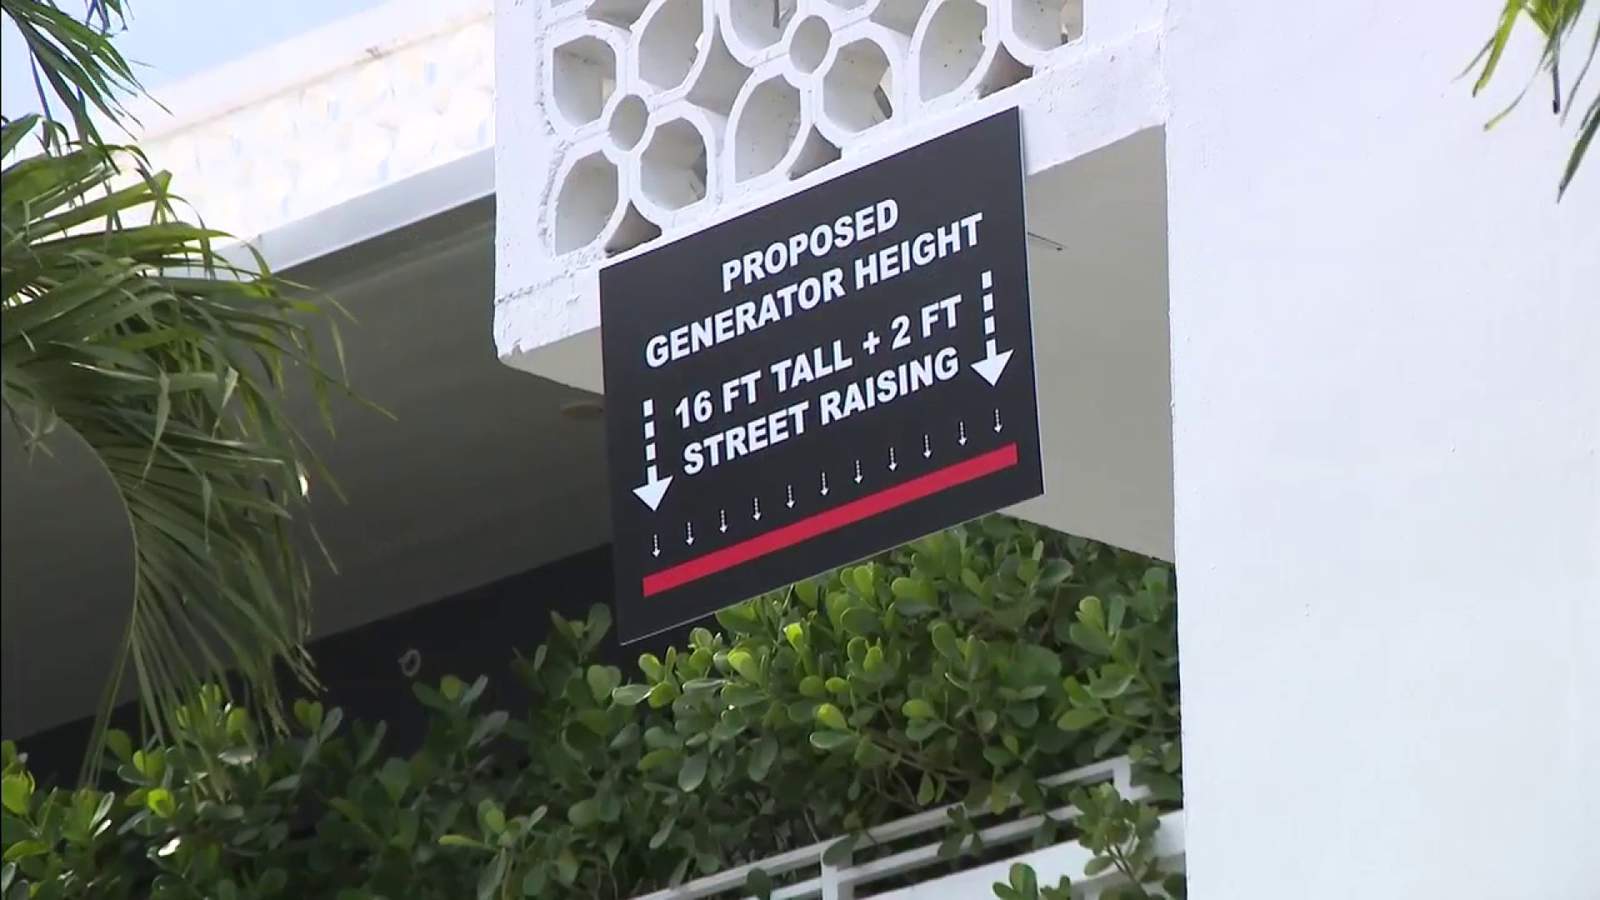 Miami Beach residents take issue with proposed pump station